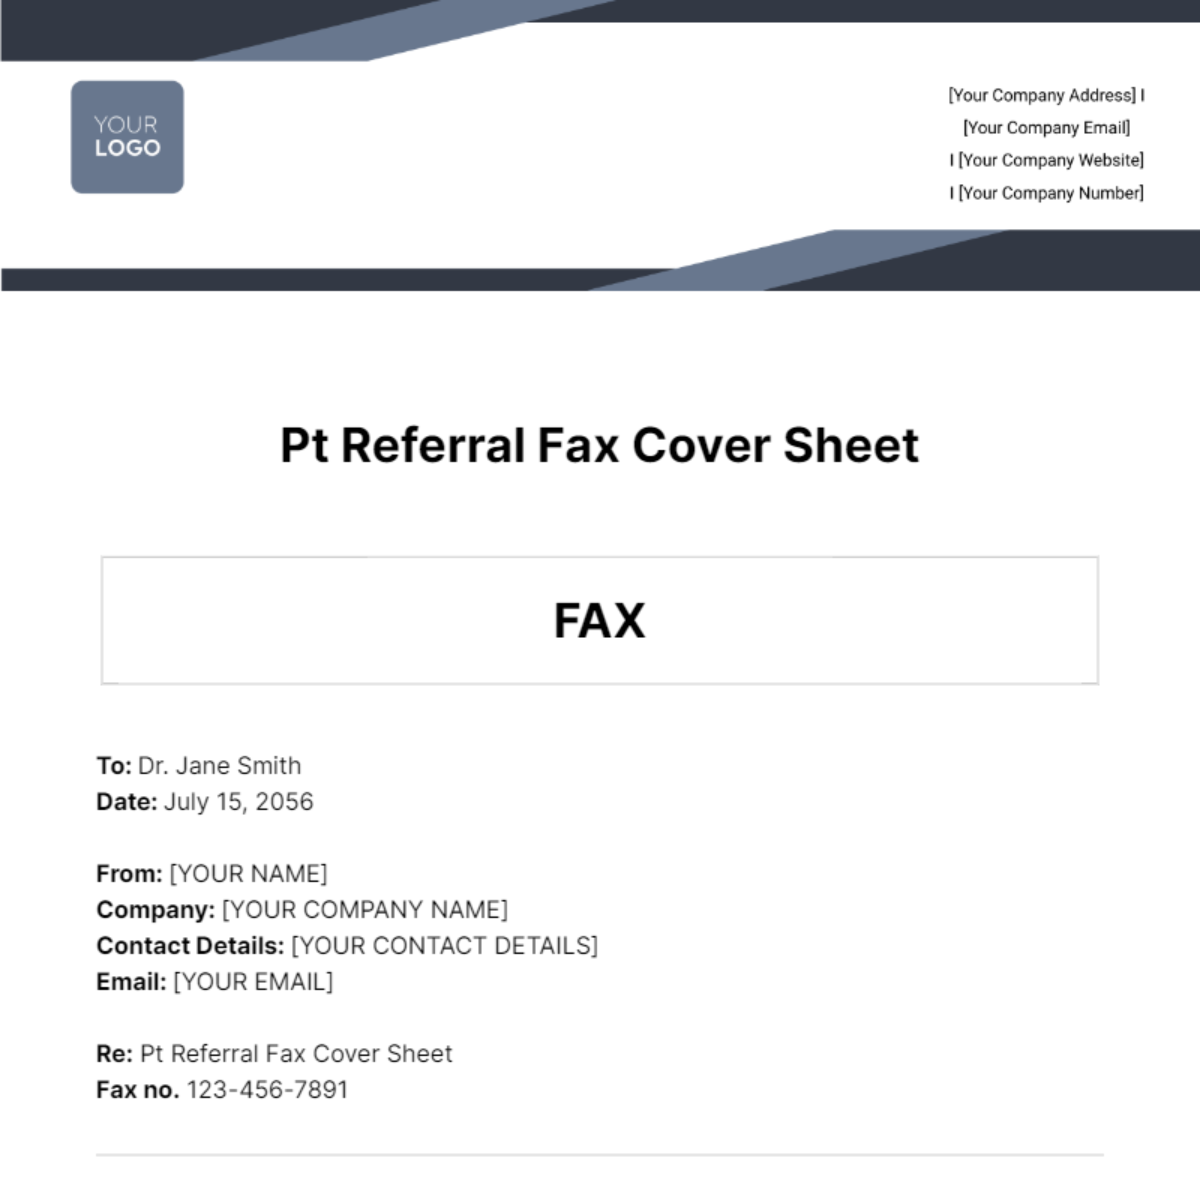 Pt Referral Fax Cover Sheet Template